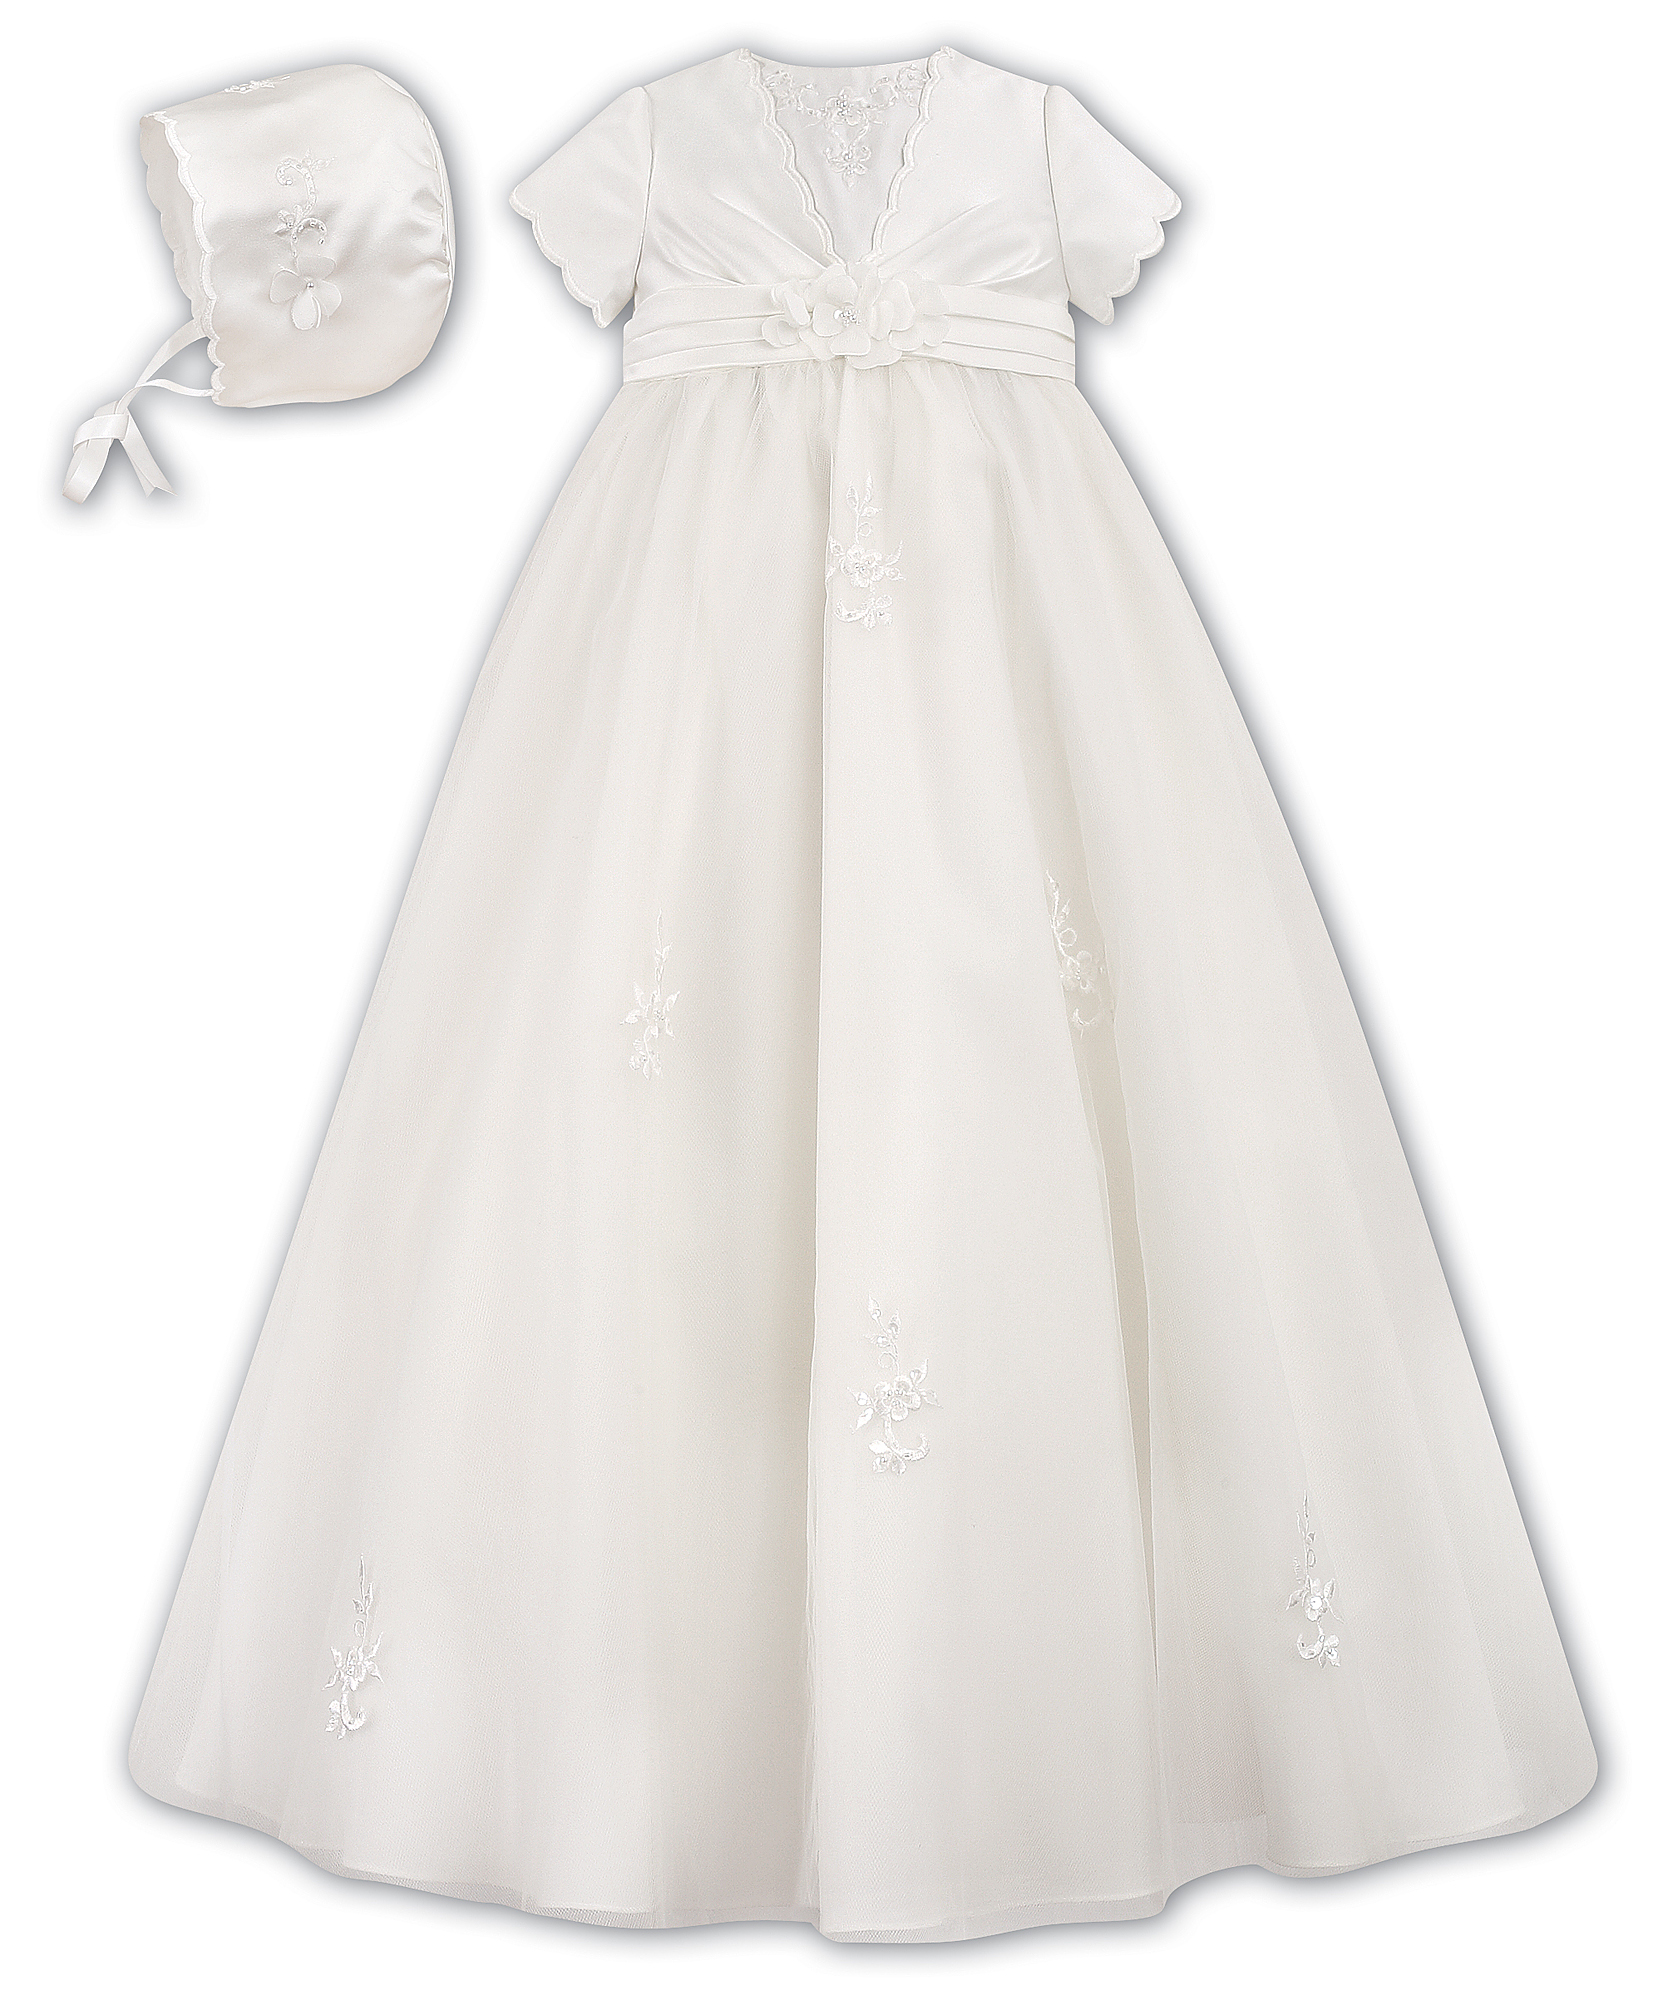 sarah louise christening outfits